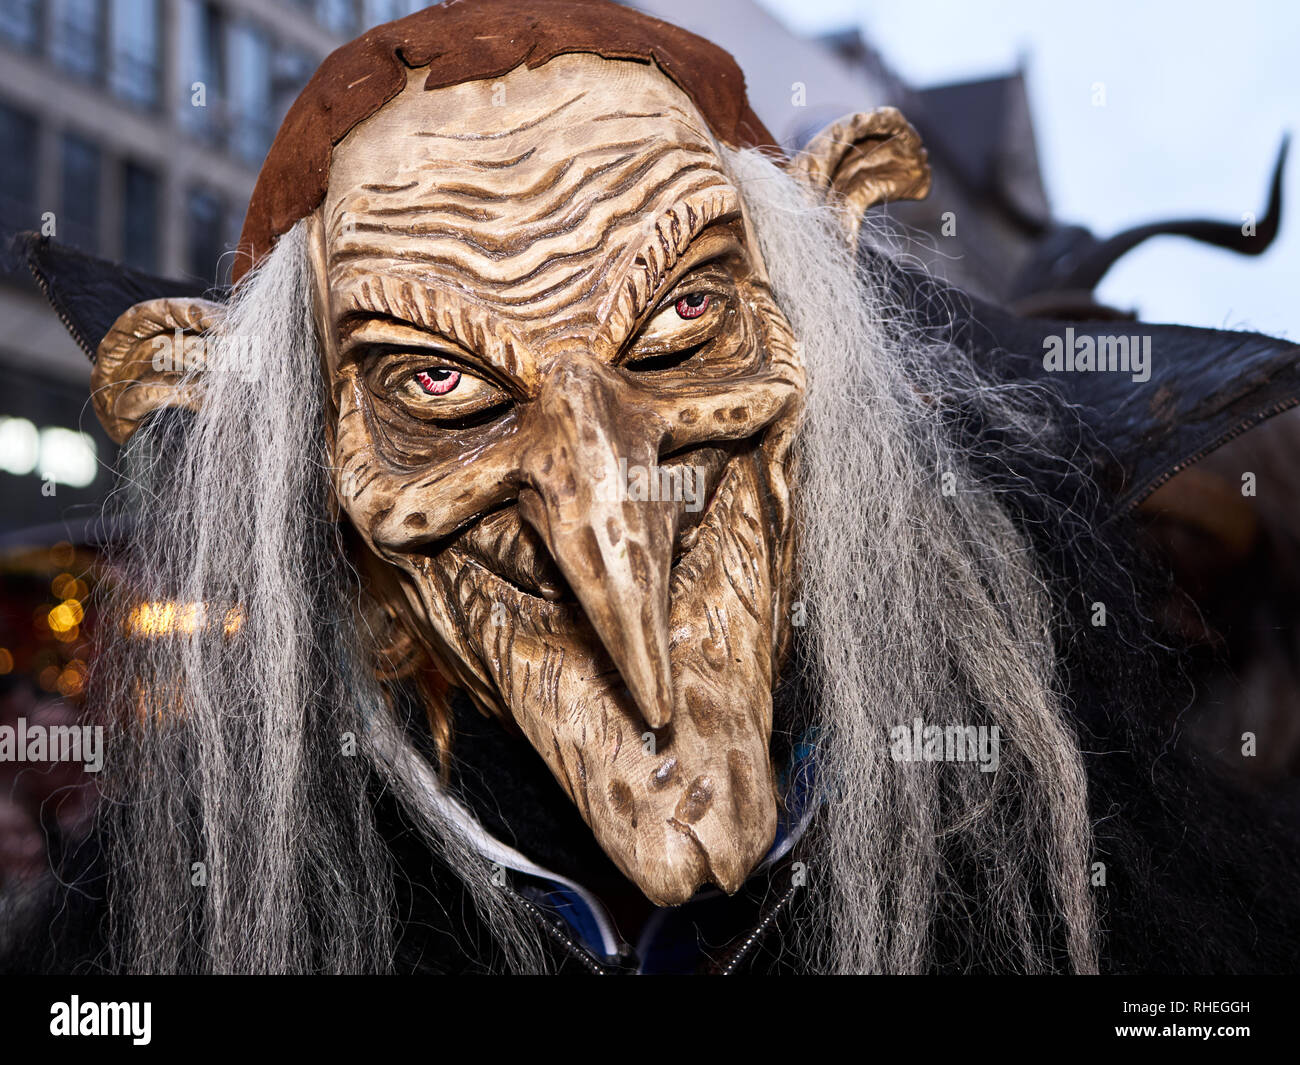 Krampus from Munich December 2018. This a devil masks made from wooden to scare people and espacially children, which from legend they tend to eat. Stock Photo